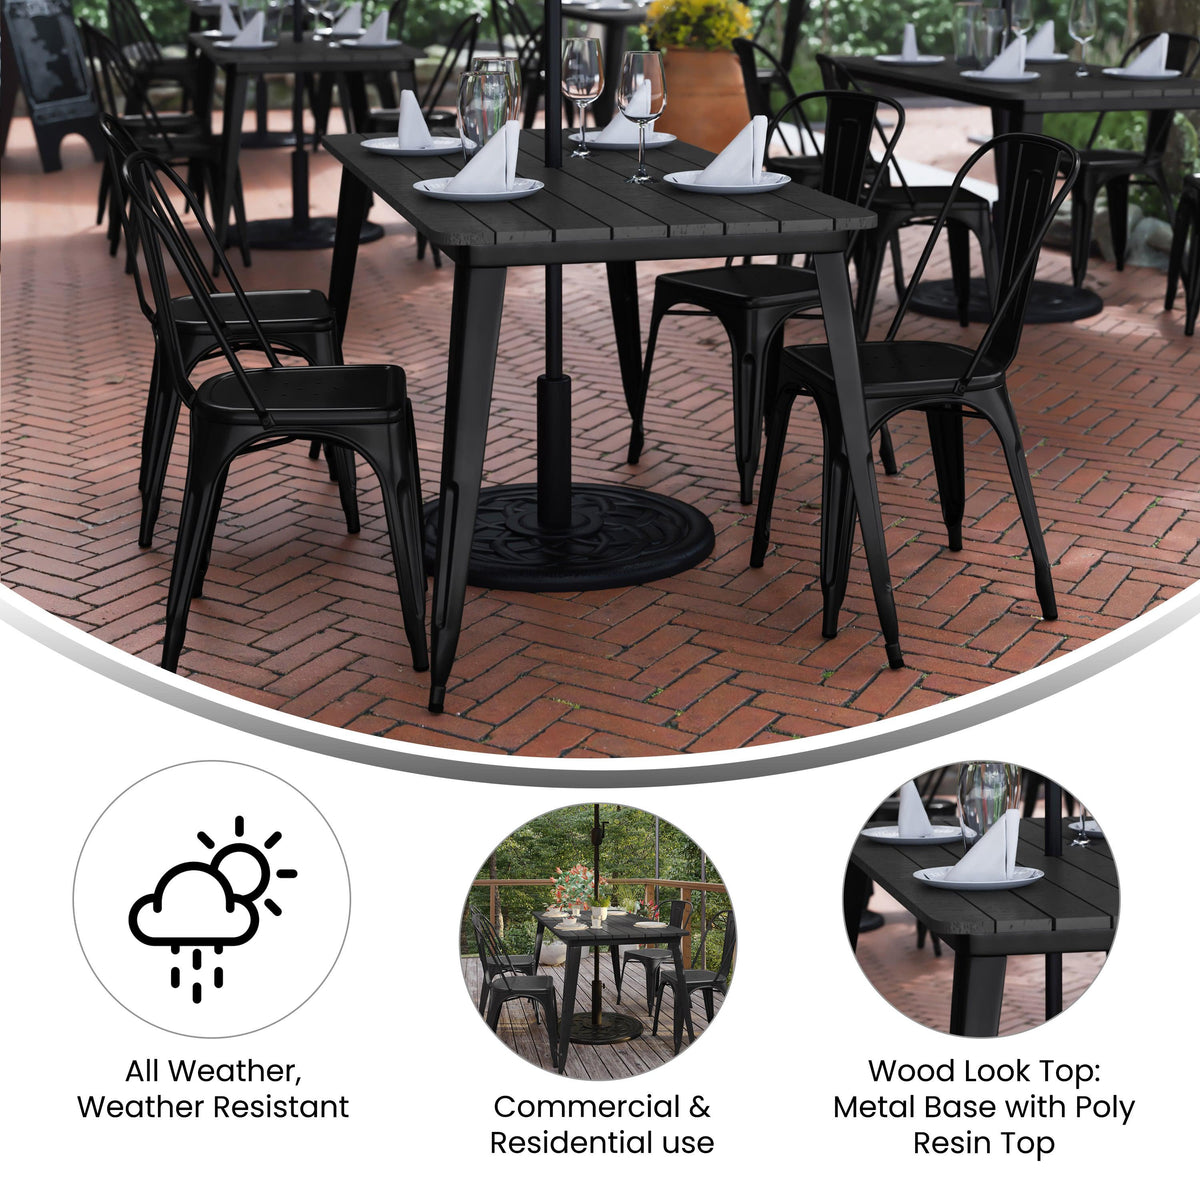 Black |#| 30x60 Commercial Poly Resin Restaurant Table with Umbrella Hole - Black/Black